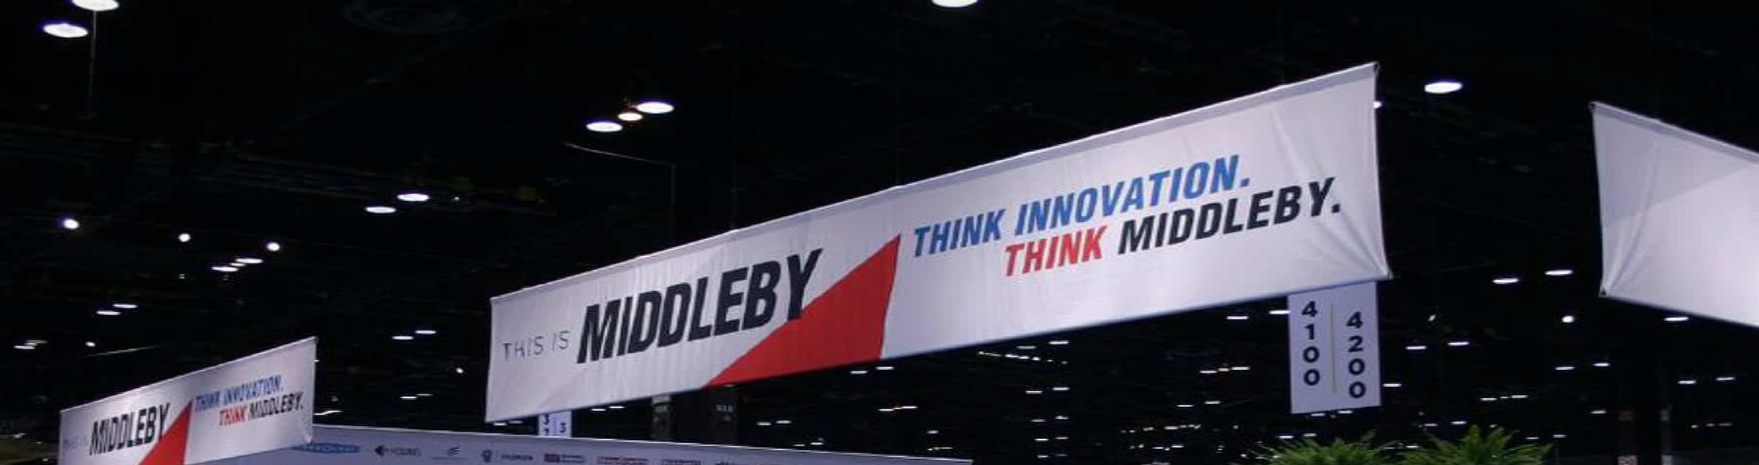 Think Innovation Think Middleby 